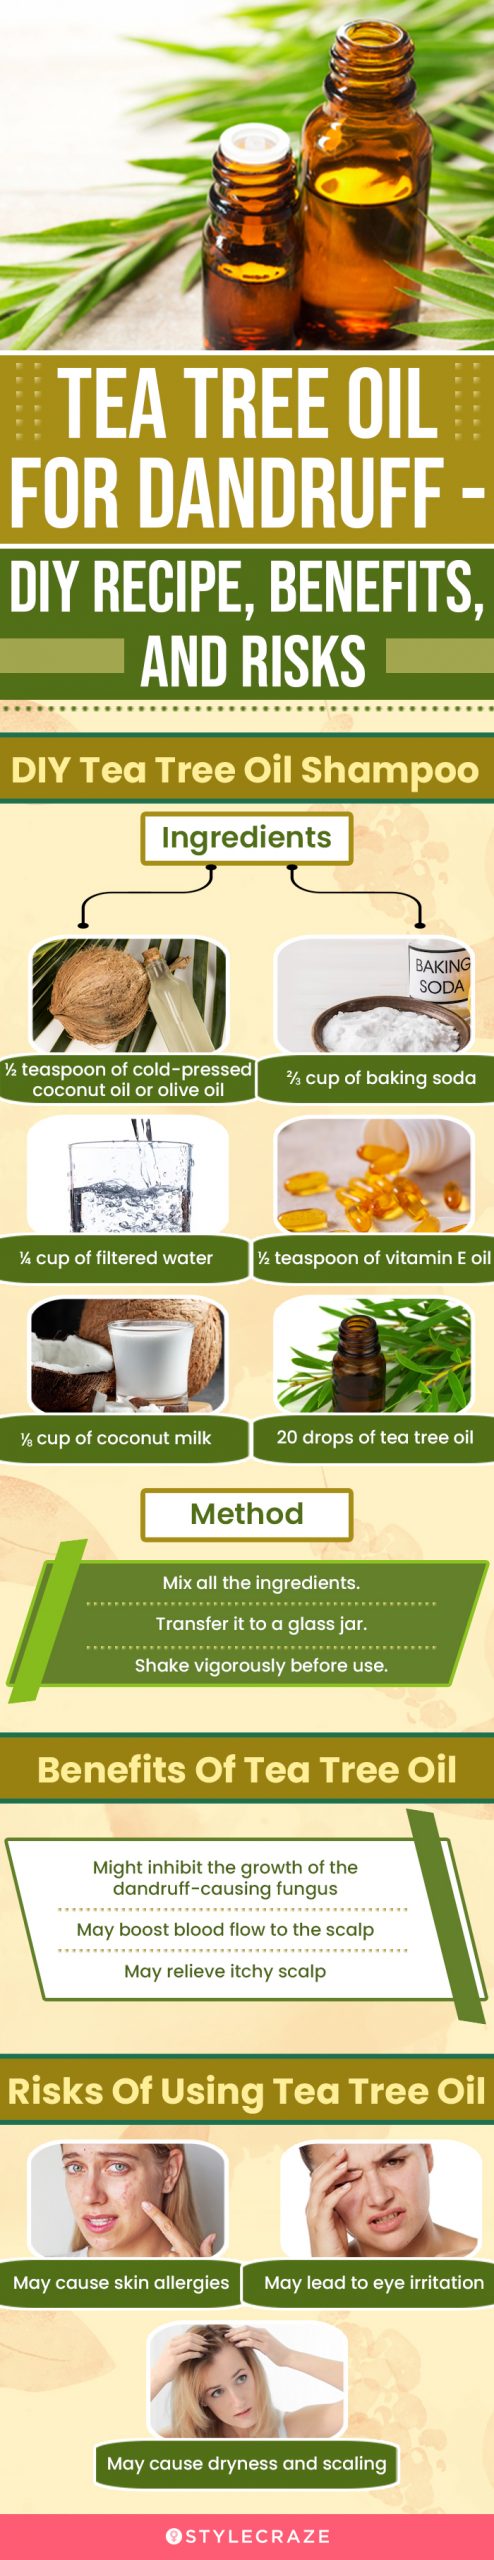 tea tree oil for dandruff diy recipe, benefits, and risks (infographic)